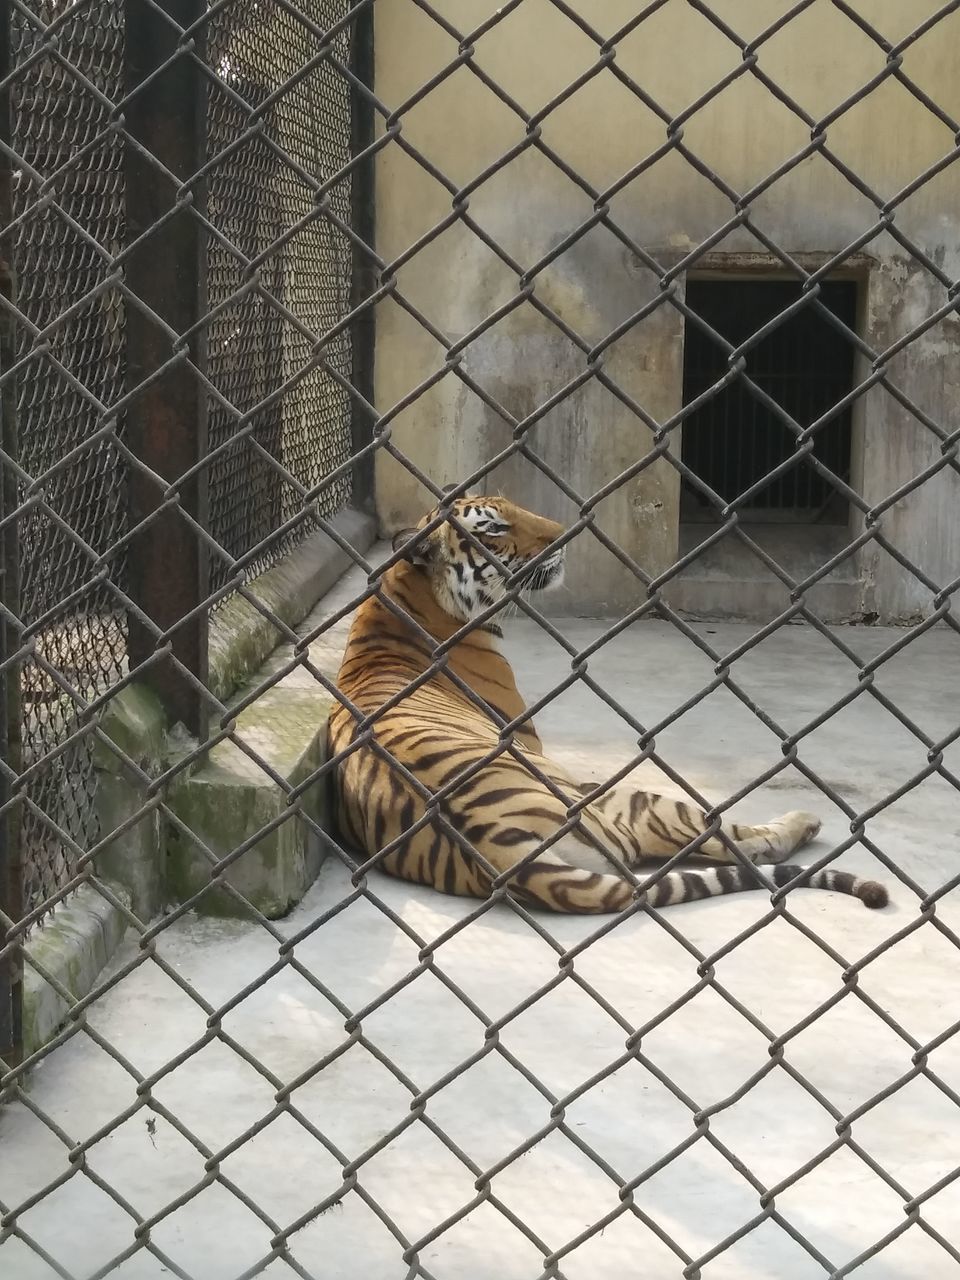 CAT SEEN THROUGH CHAINLINK FENCE IN ZOO